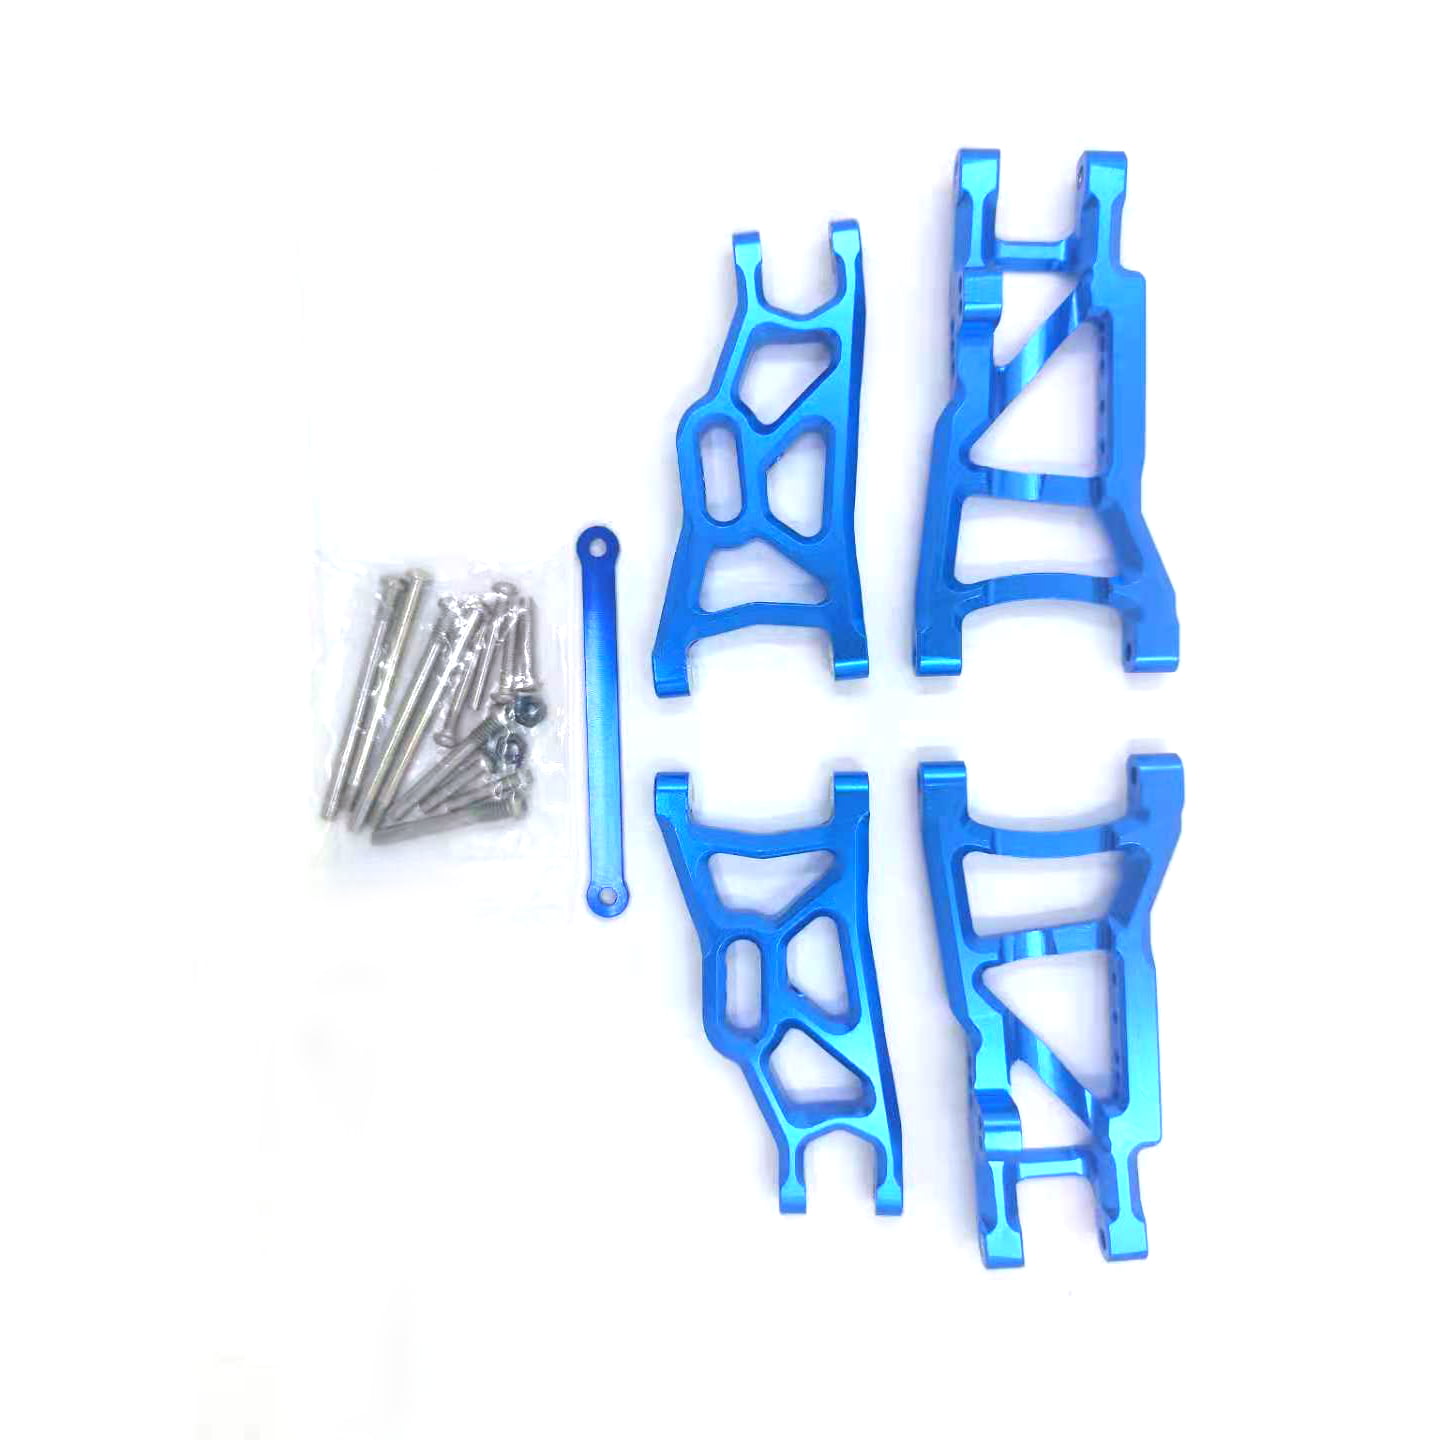 Aluminum Front&Rear Suspension A-Arms&Tie Bar for 1/10 Traxxas Slash 2WD RC Car Upgrade Parts Hop Ups Replacement of 2555 3631 2532 